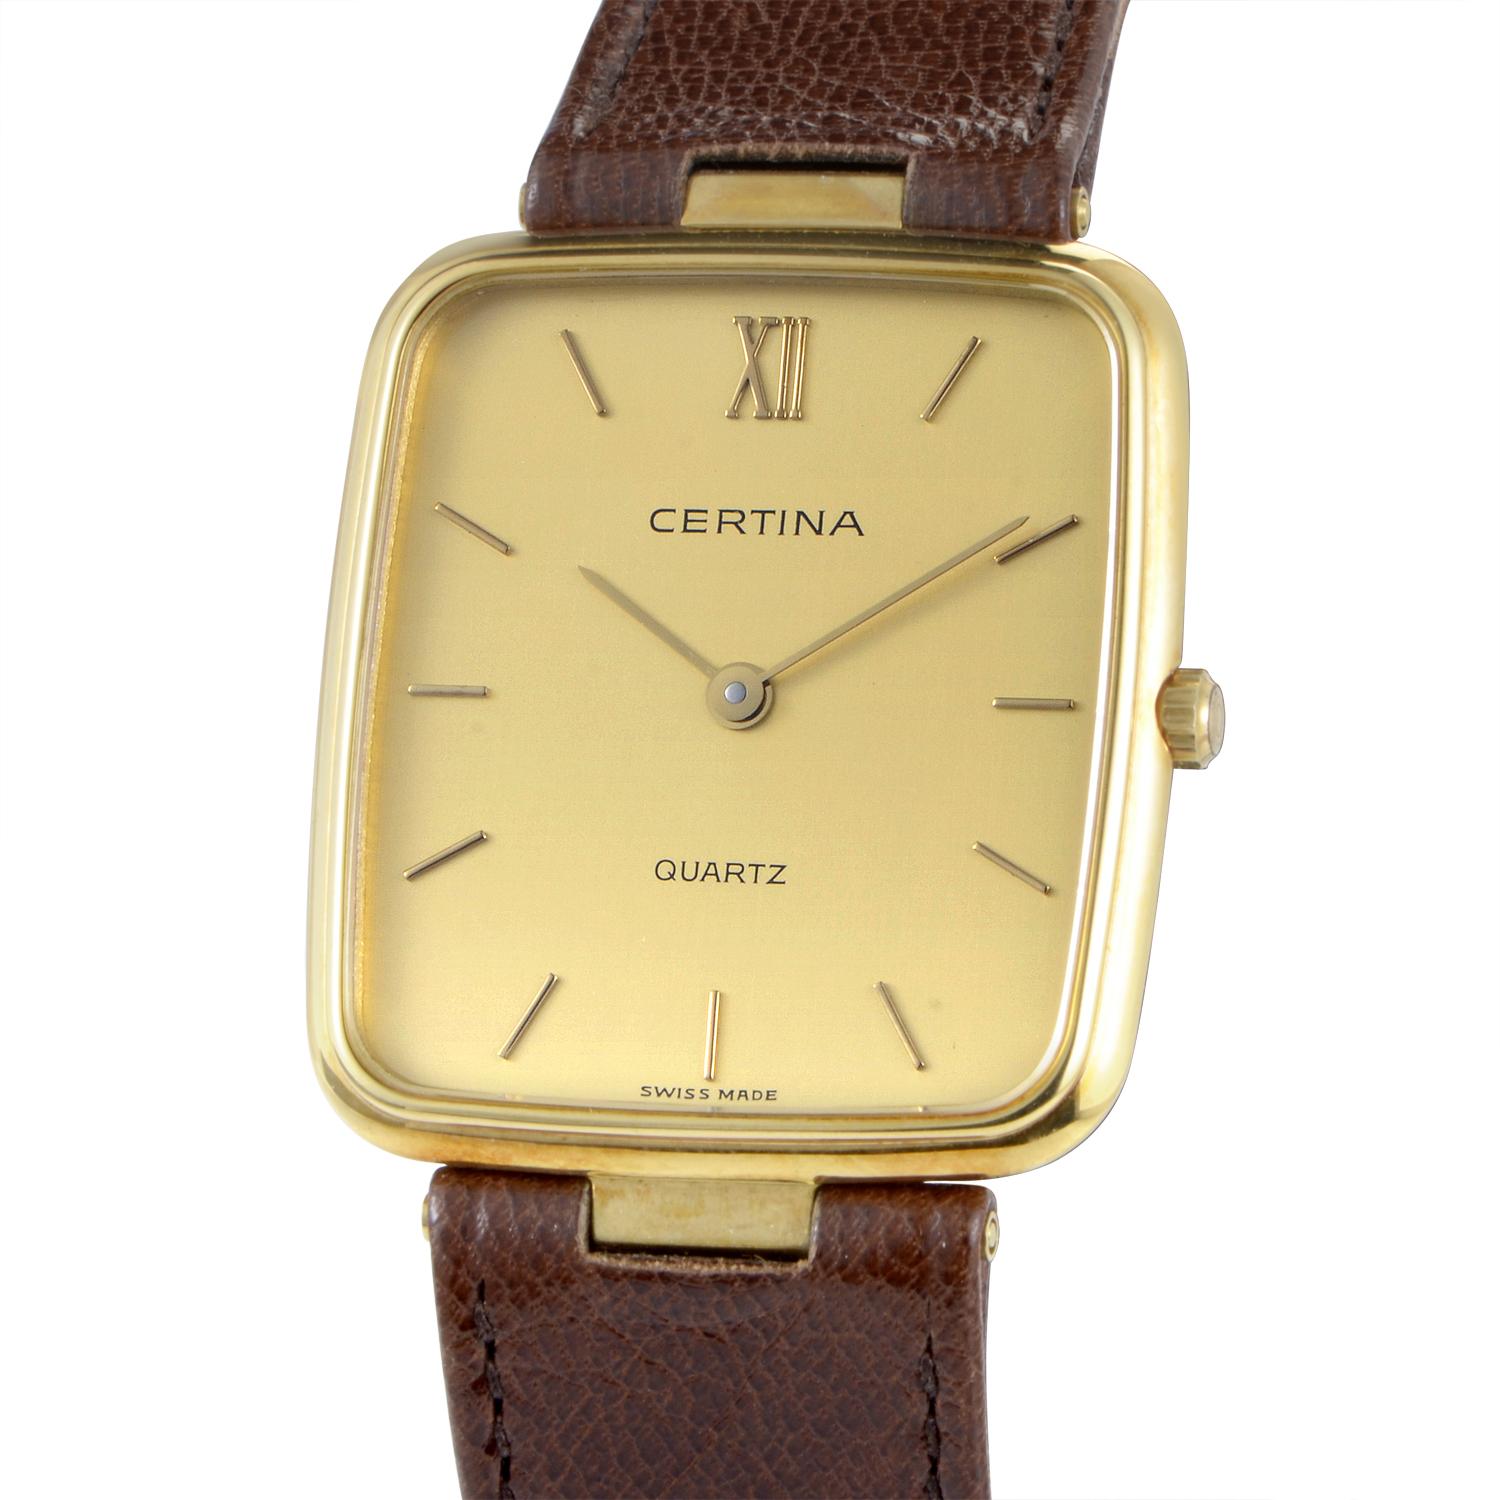 This quartz timepiece from Certina is the perfect accessory for a casual outfit. The watch's vertically rectangular case is made of 18K yellow gold and boasts a champagne-colored dial. The dial is fairly simple and only displays indication of the